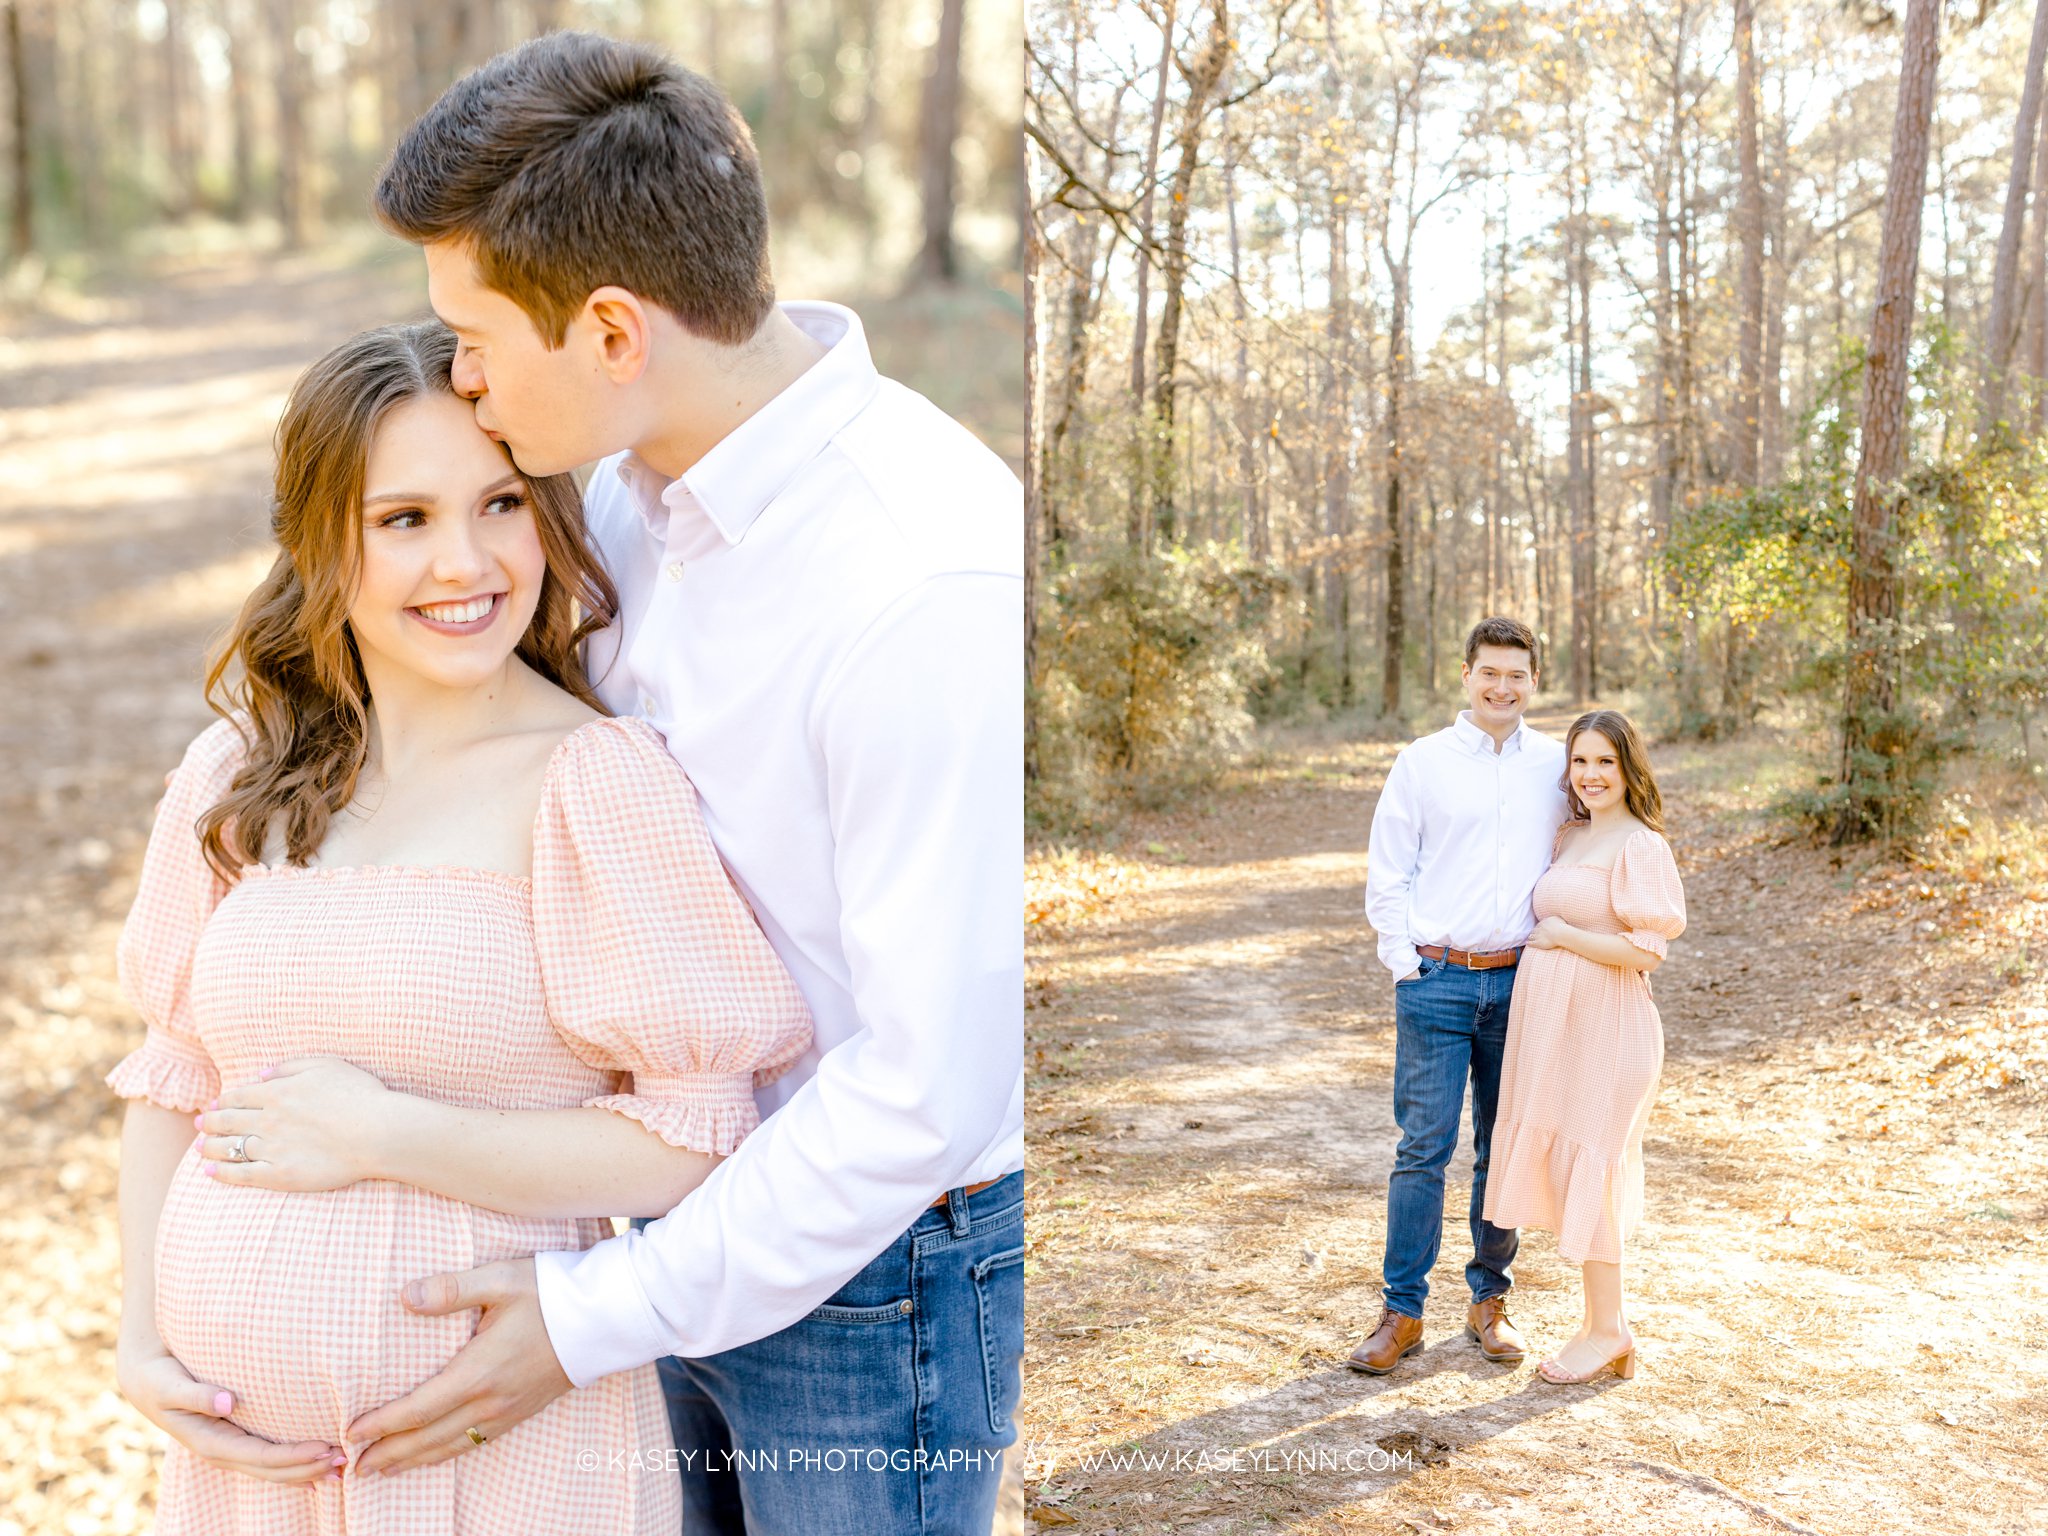 The Woodlands Maternity Session / Kasey Lynn Photography